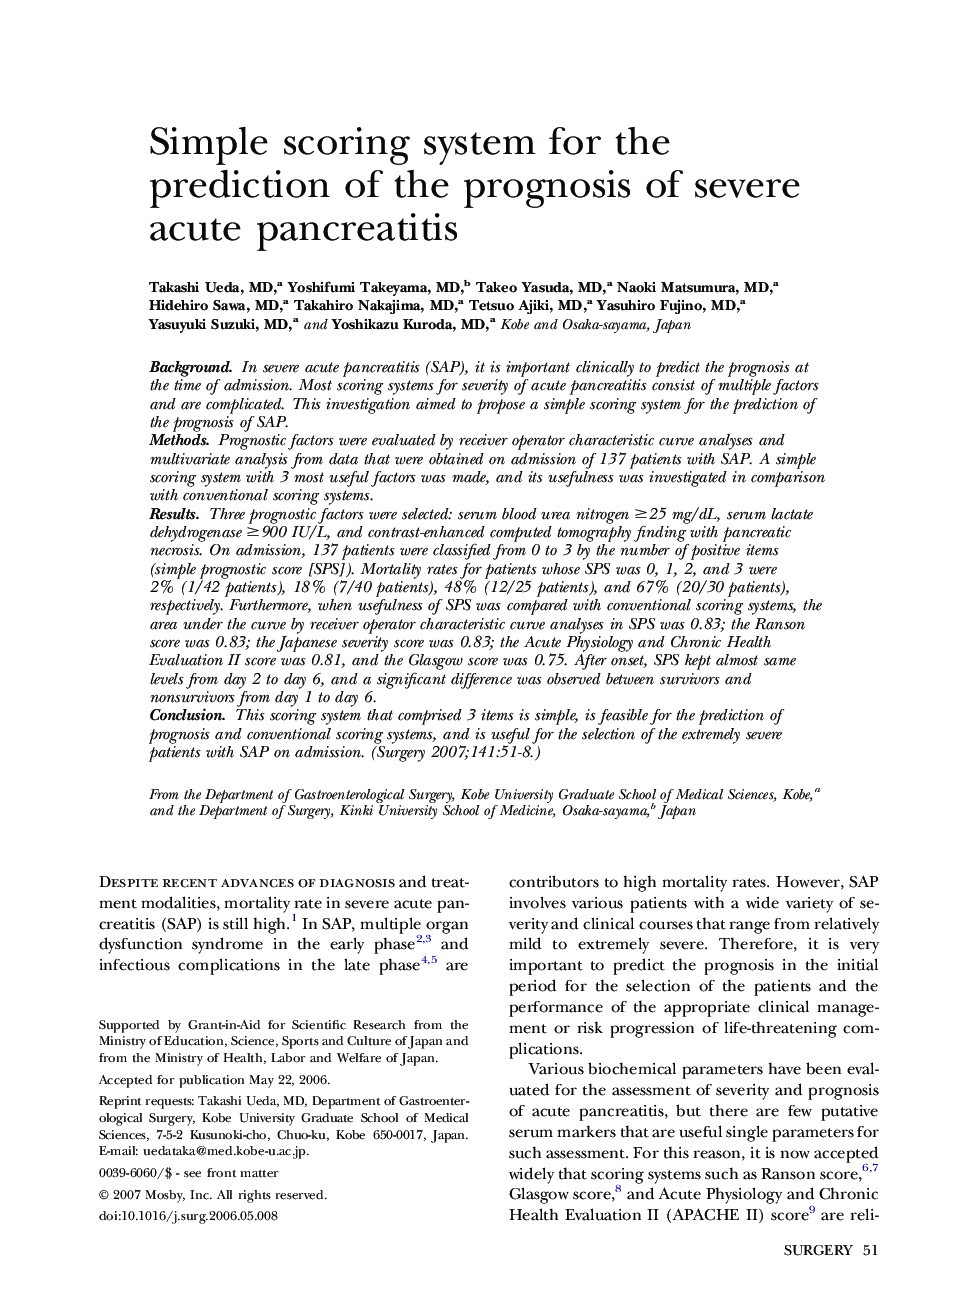 Simple scoring system for the prediction of the prognosis of severe acute pancreatitis 